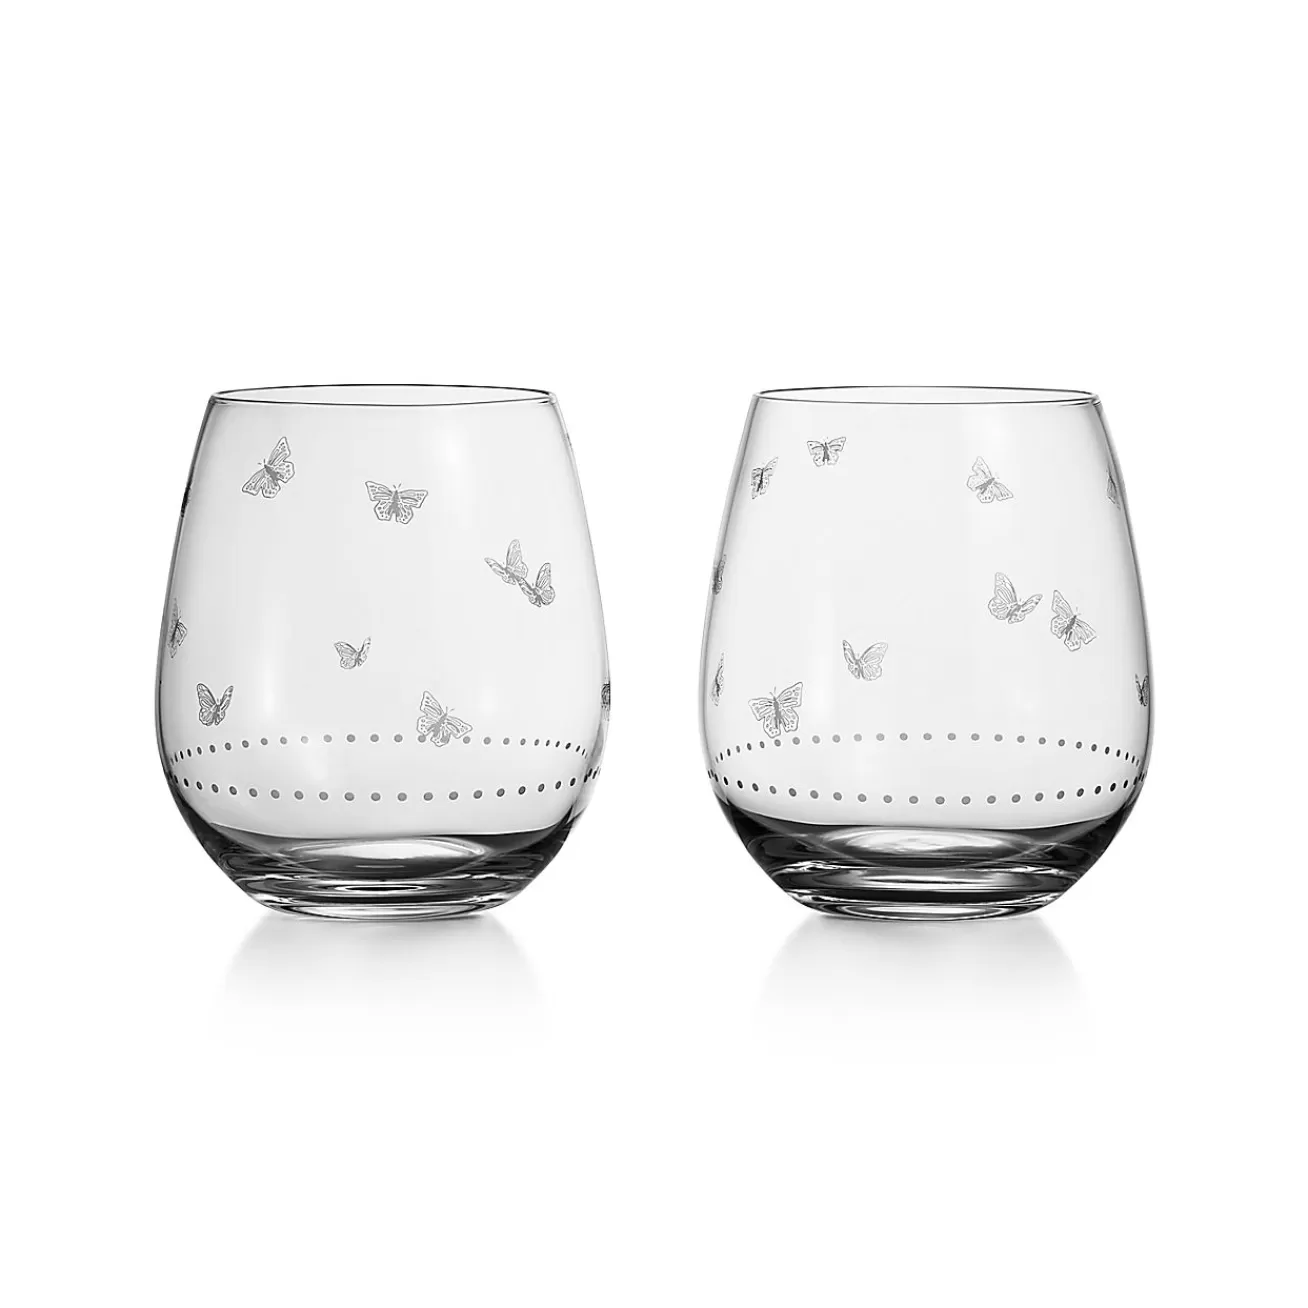 Tiffany & Co. Tiffany Jardin Stemless Red Wine Glasses in Etched Glass, Set of Two | ^ Glassware & Barware | Bar & Drinkware